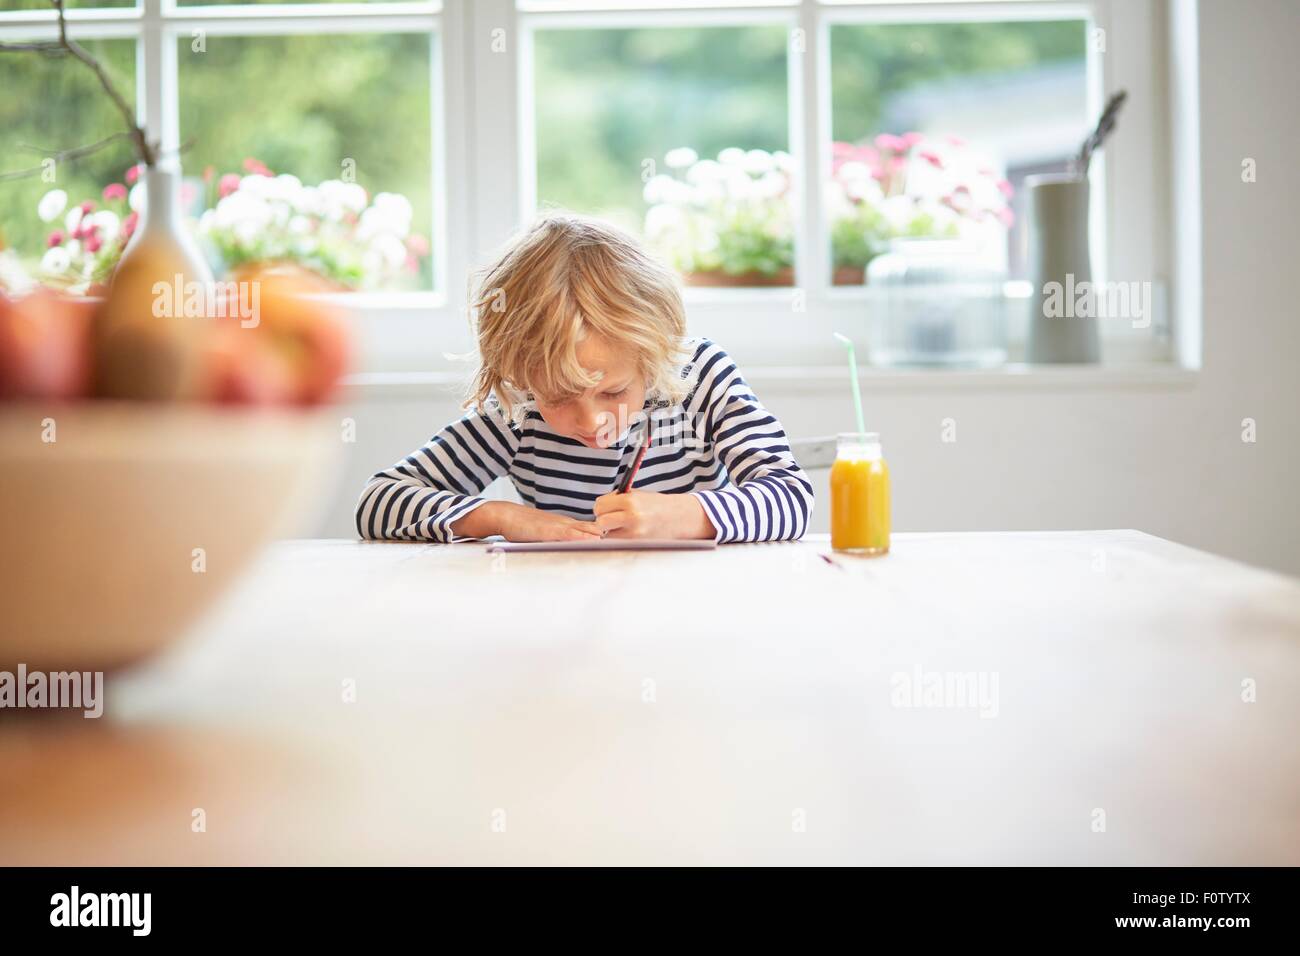 Young boy sitting at table drawing on paper Stock Photo